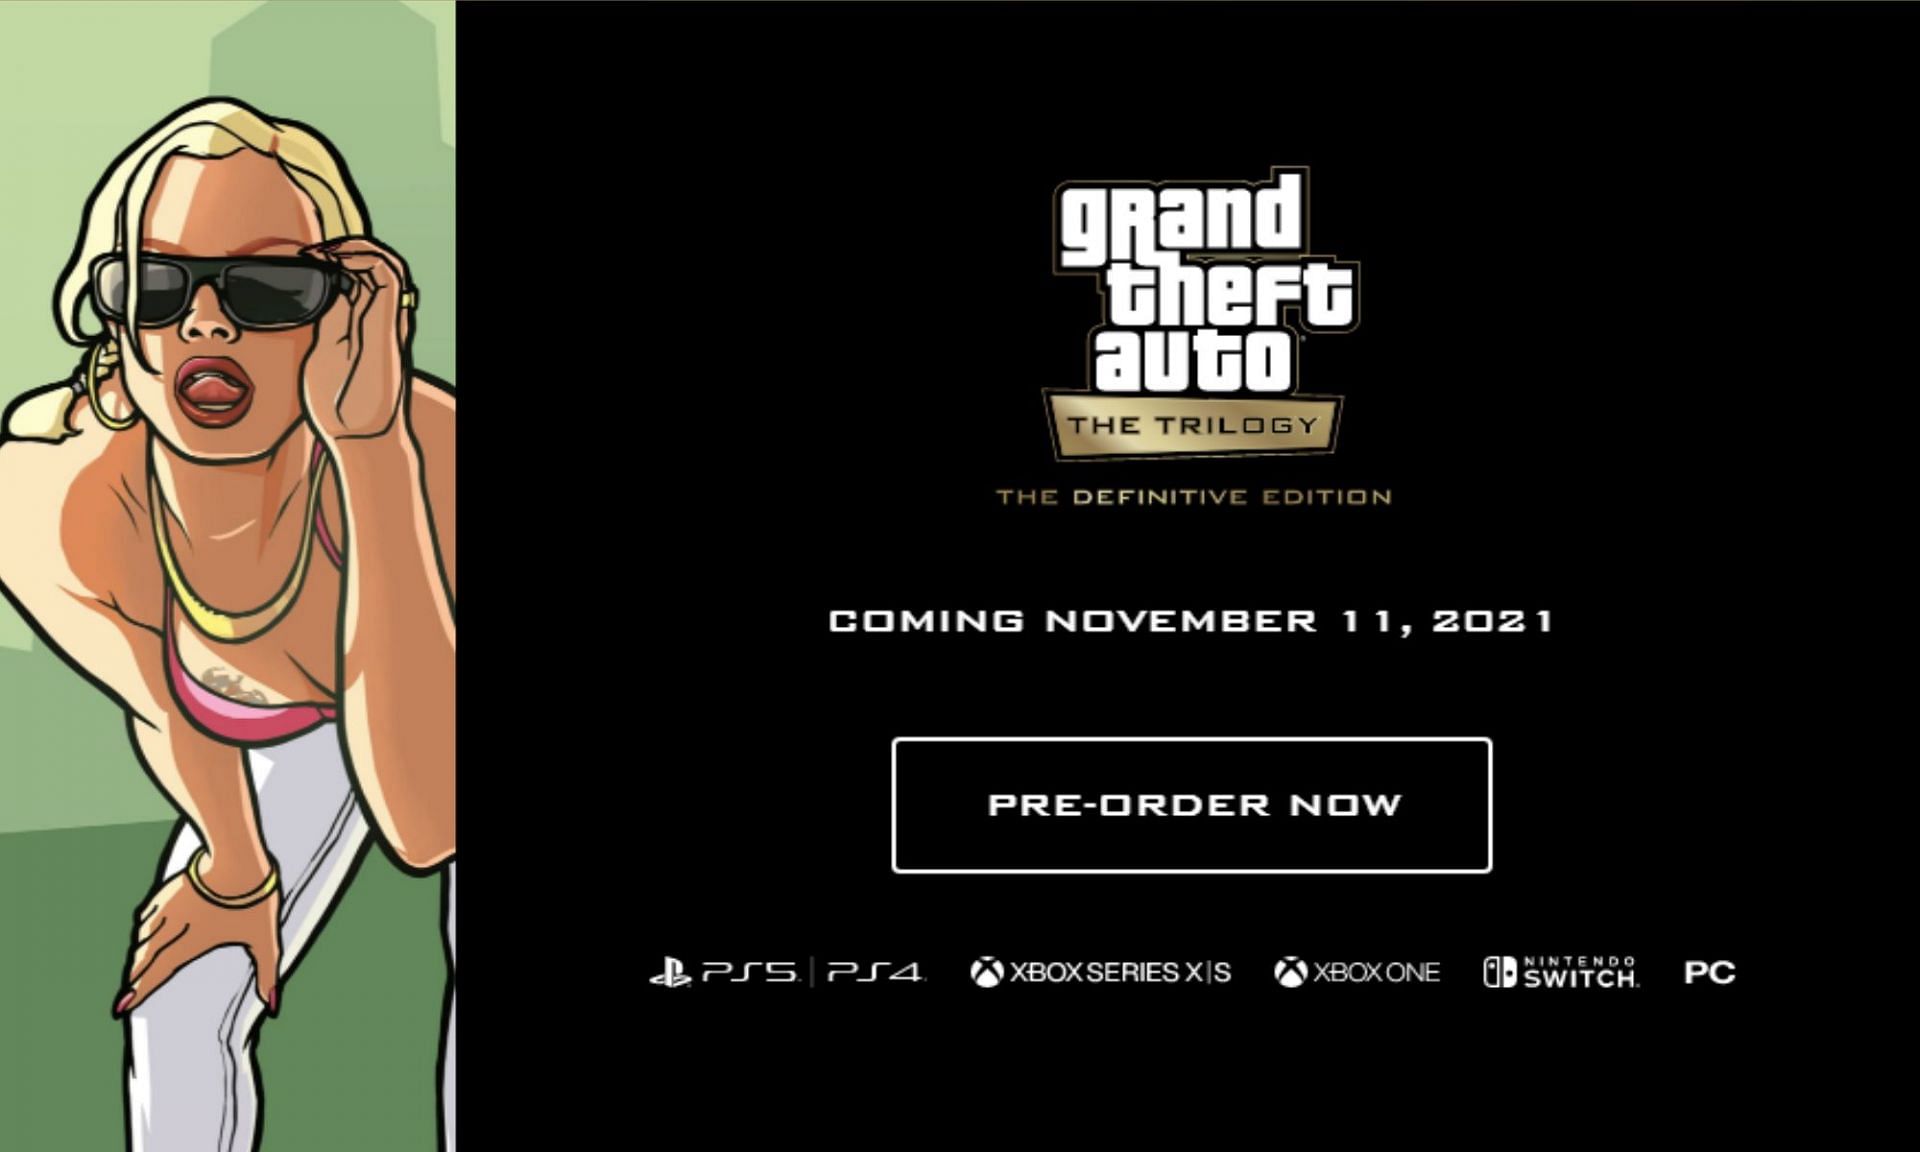 Theft theft Games, Grand – Auto: 11 The iii Coming edition - Trilogy November auto Rockstar The definitive Edition Definitive the grand